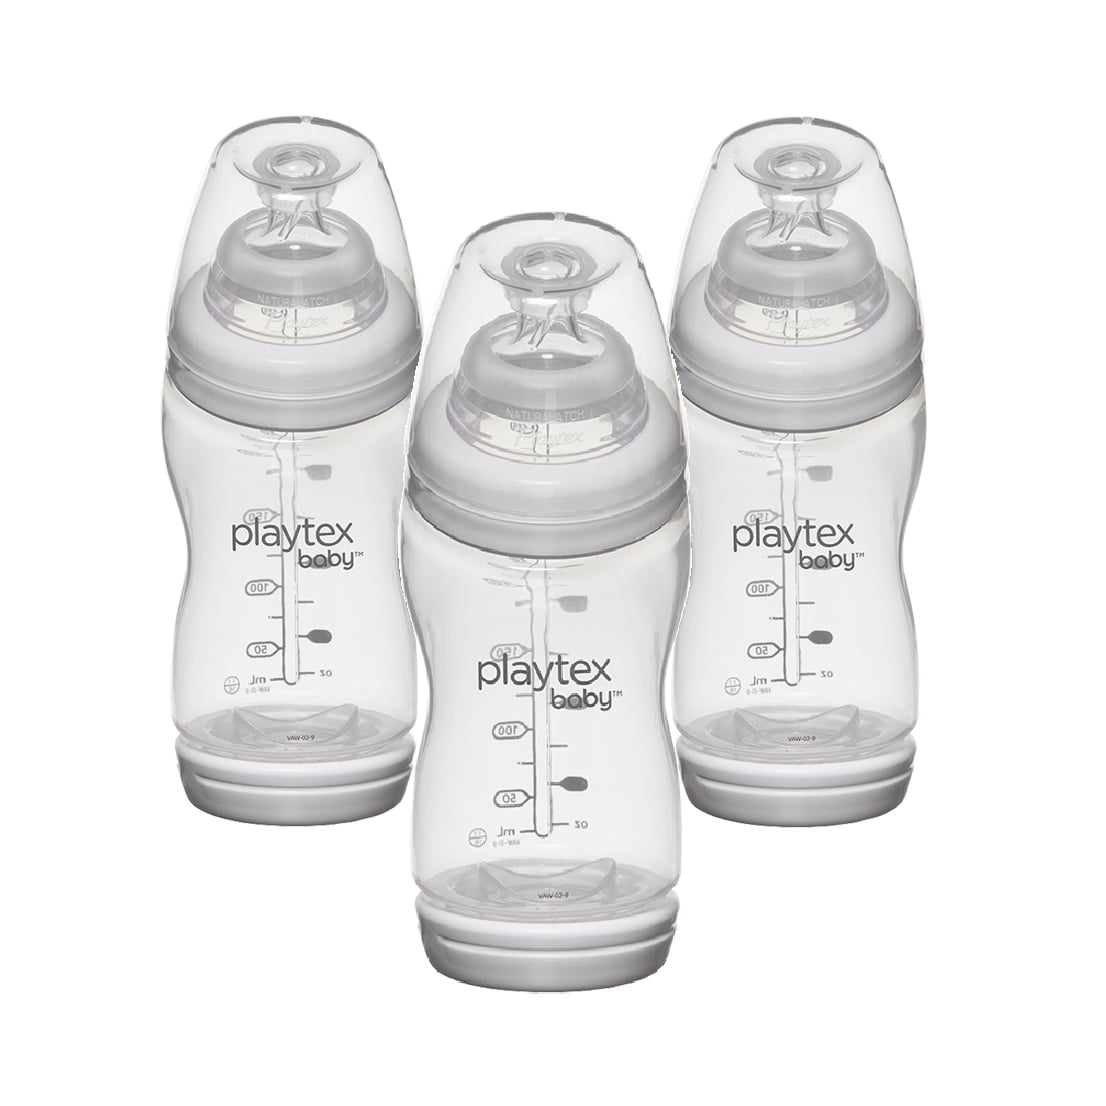 playtex baby ventaire